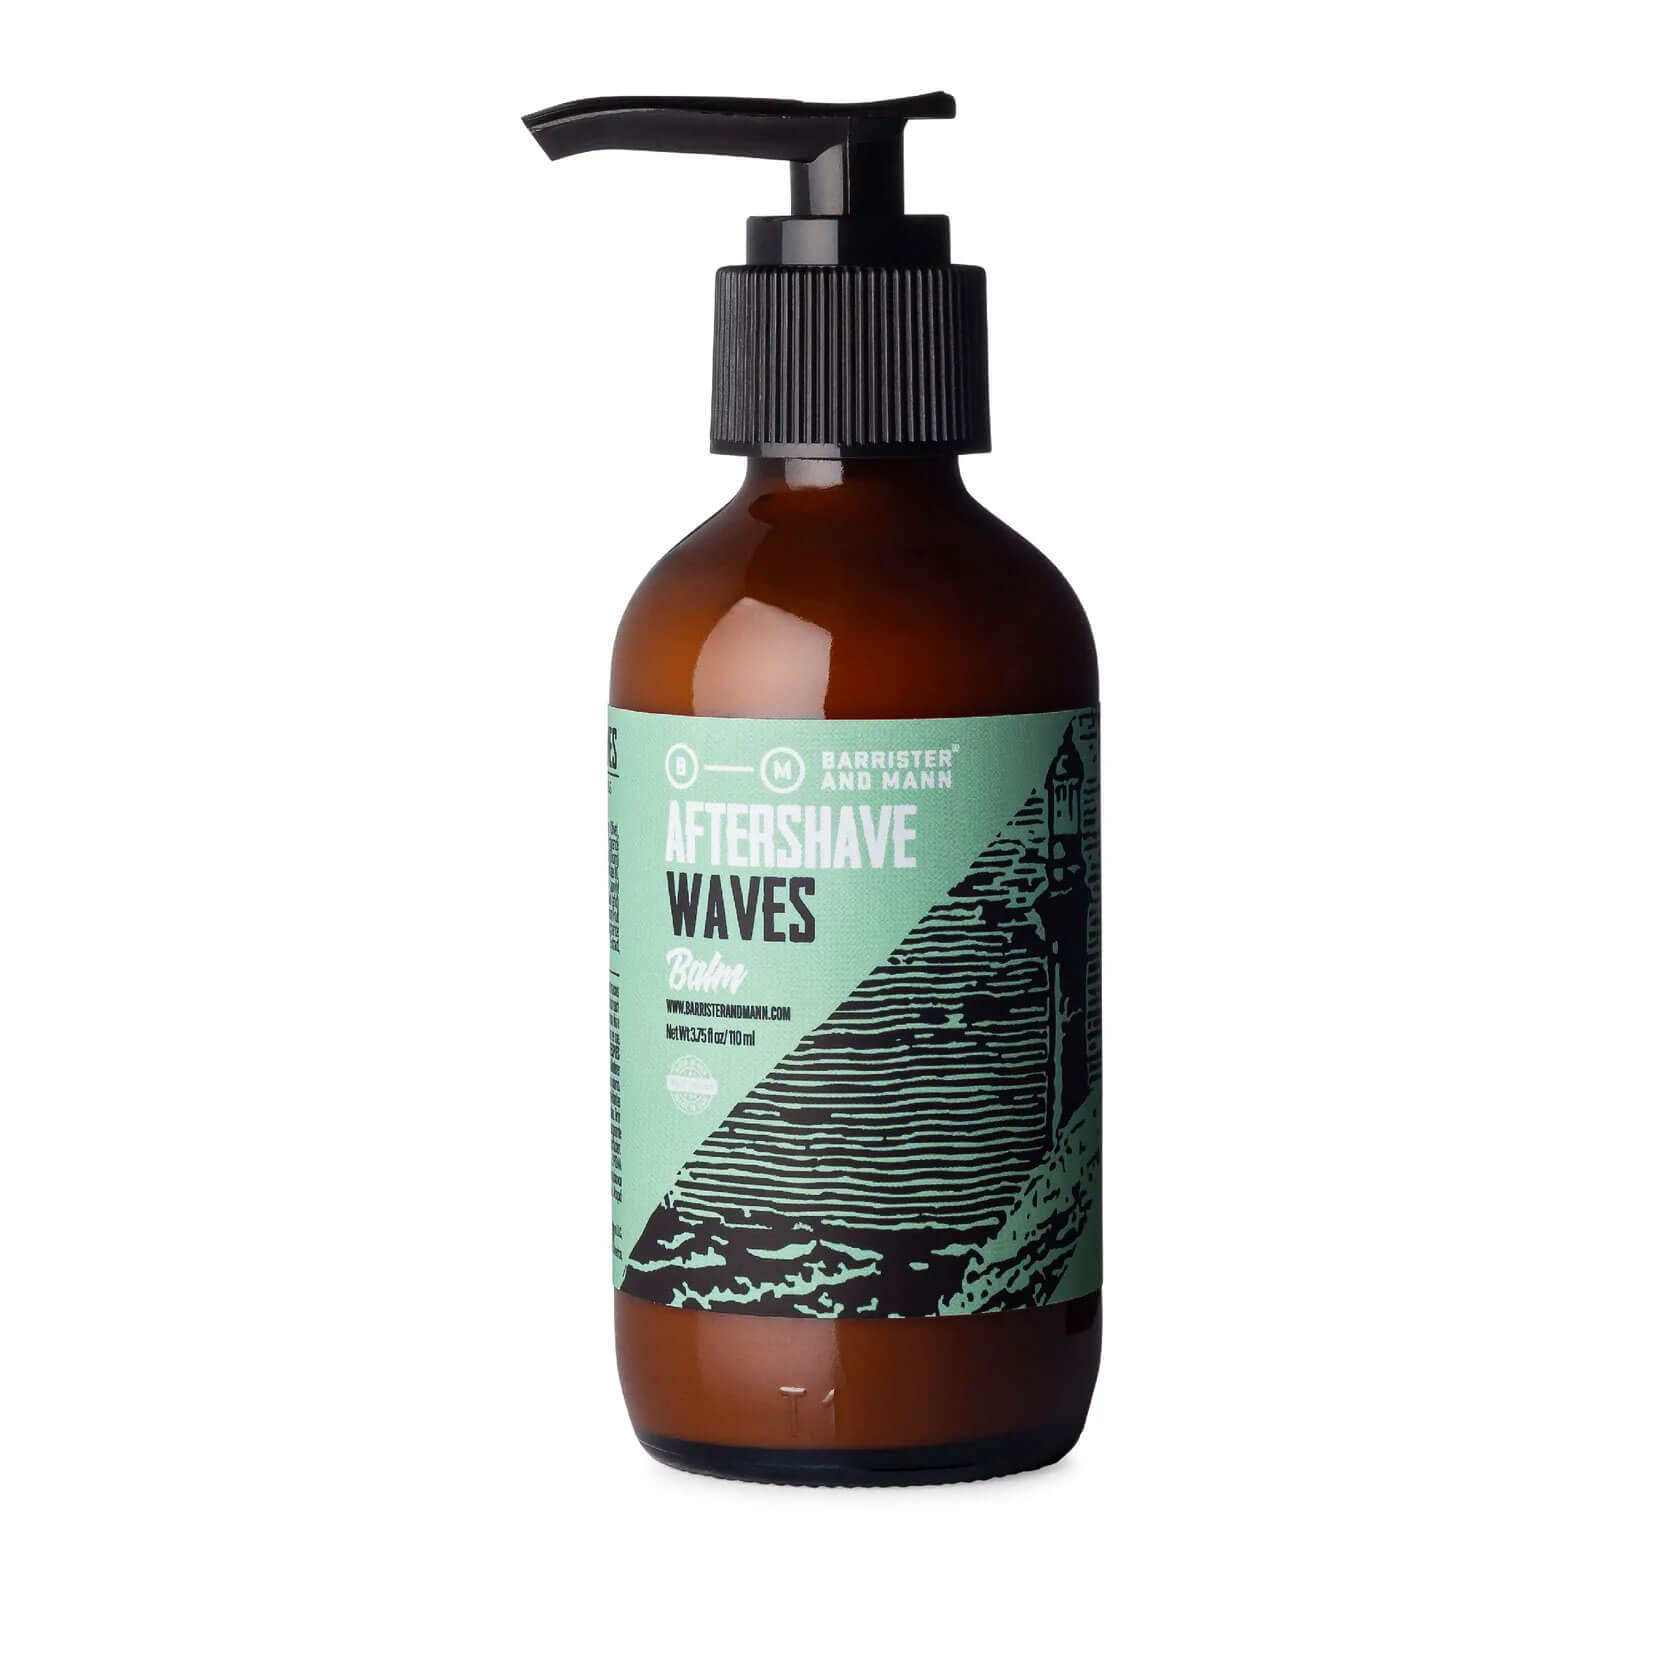 Barrister and Mann Waves Aftershave Balm